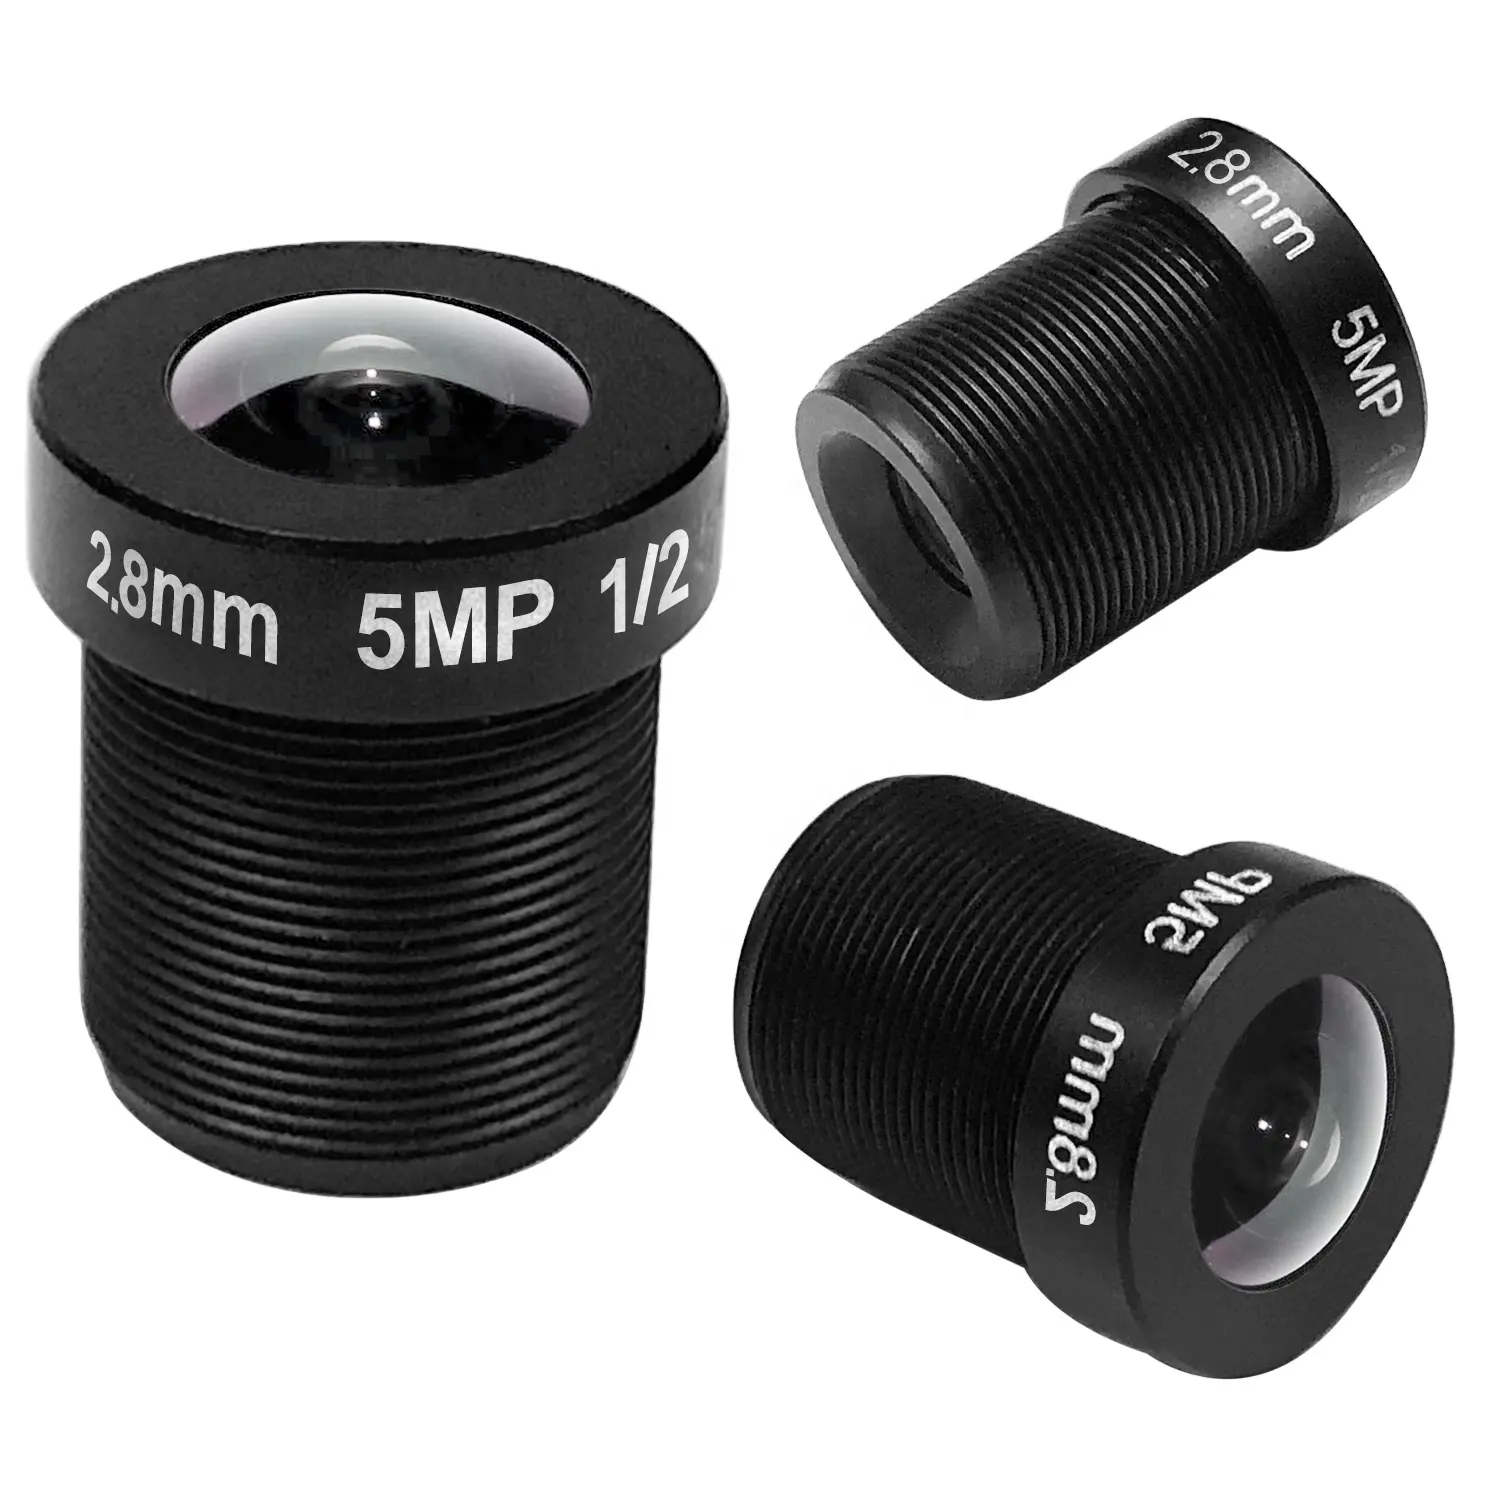 Camera Lens CCTV HD 5MP Fisheye 12mm M12 180 Degree Wide Viewing Angle F2.0 1/2.5" For Surveillance Security Cameras